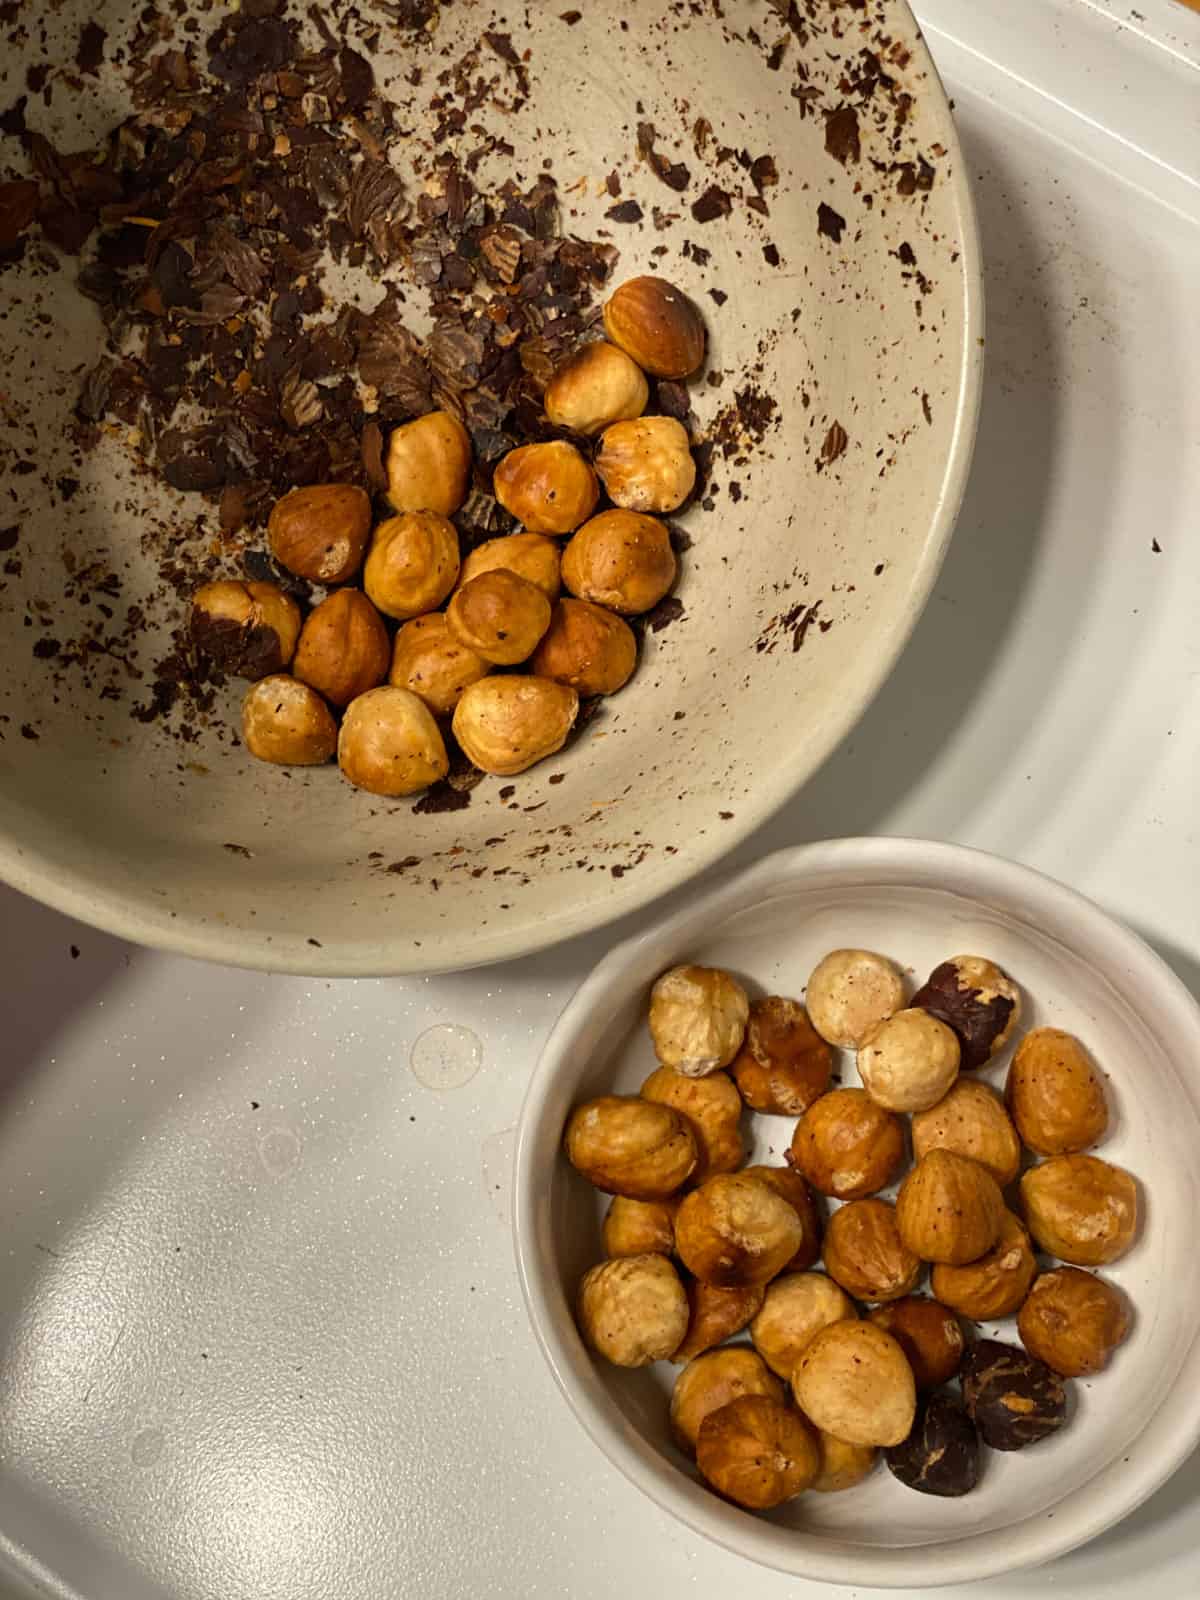 process of removing shells from hazelnuts